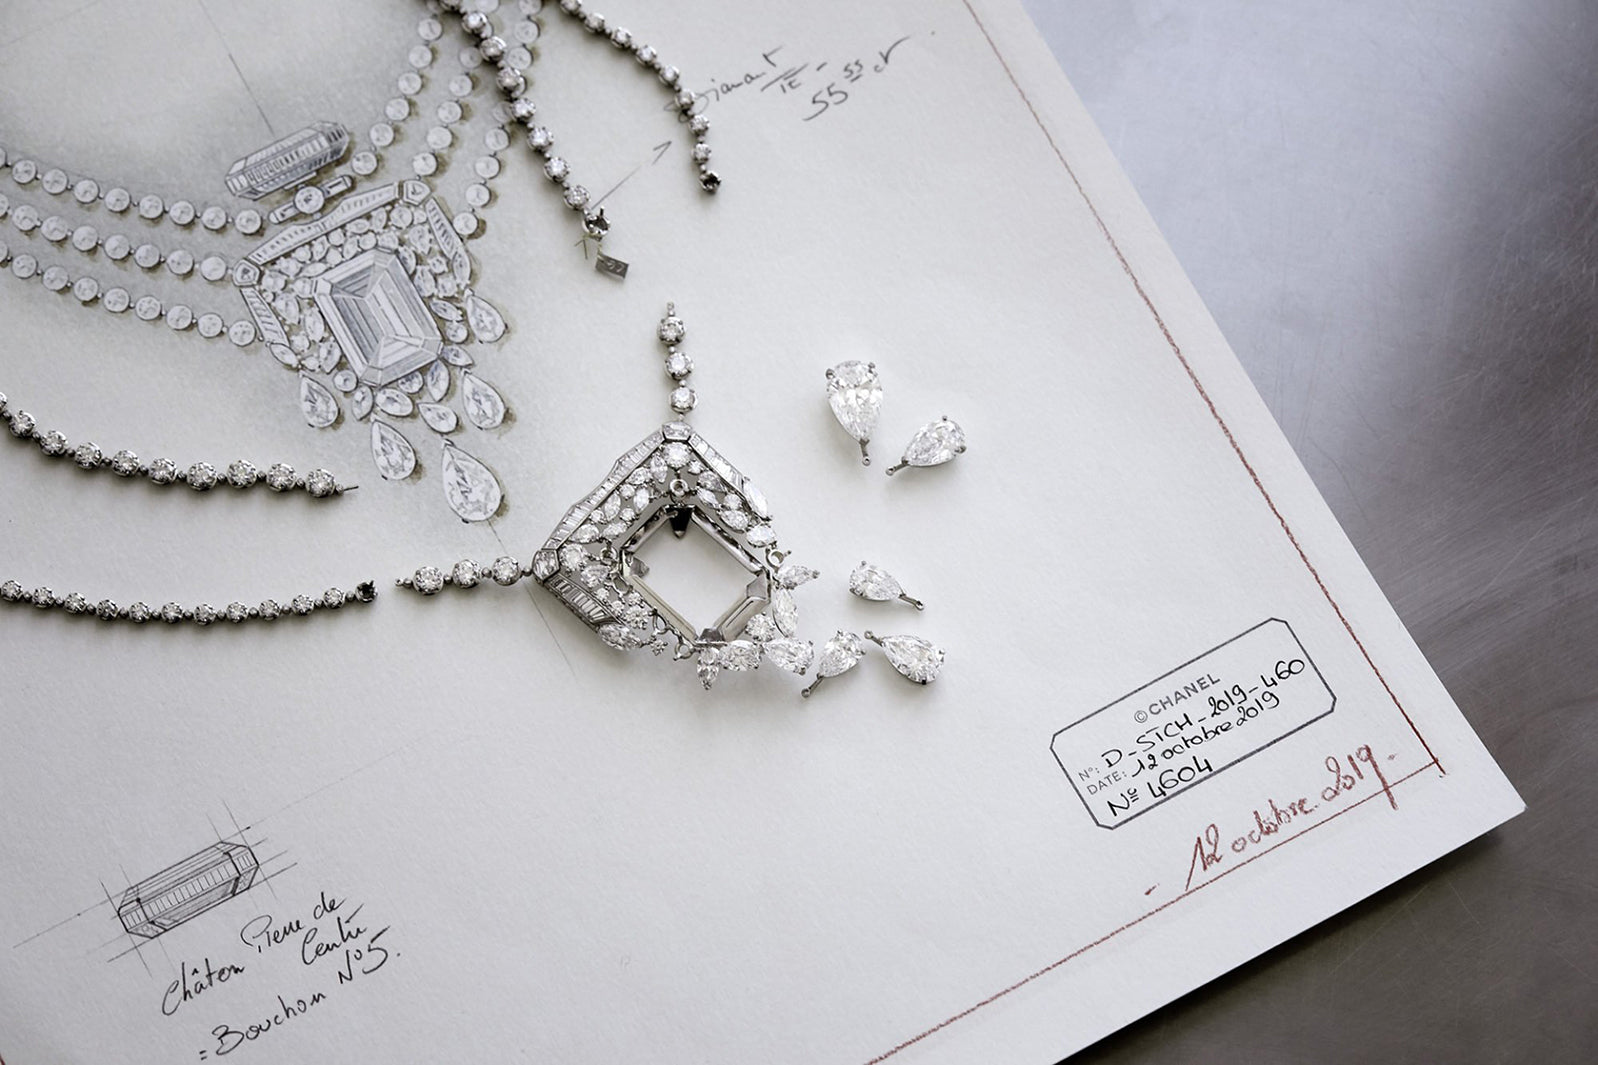 Chanel designs a 55.55-carat diamond necklace for the 100th